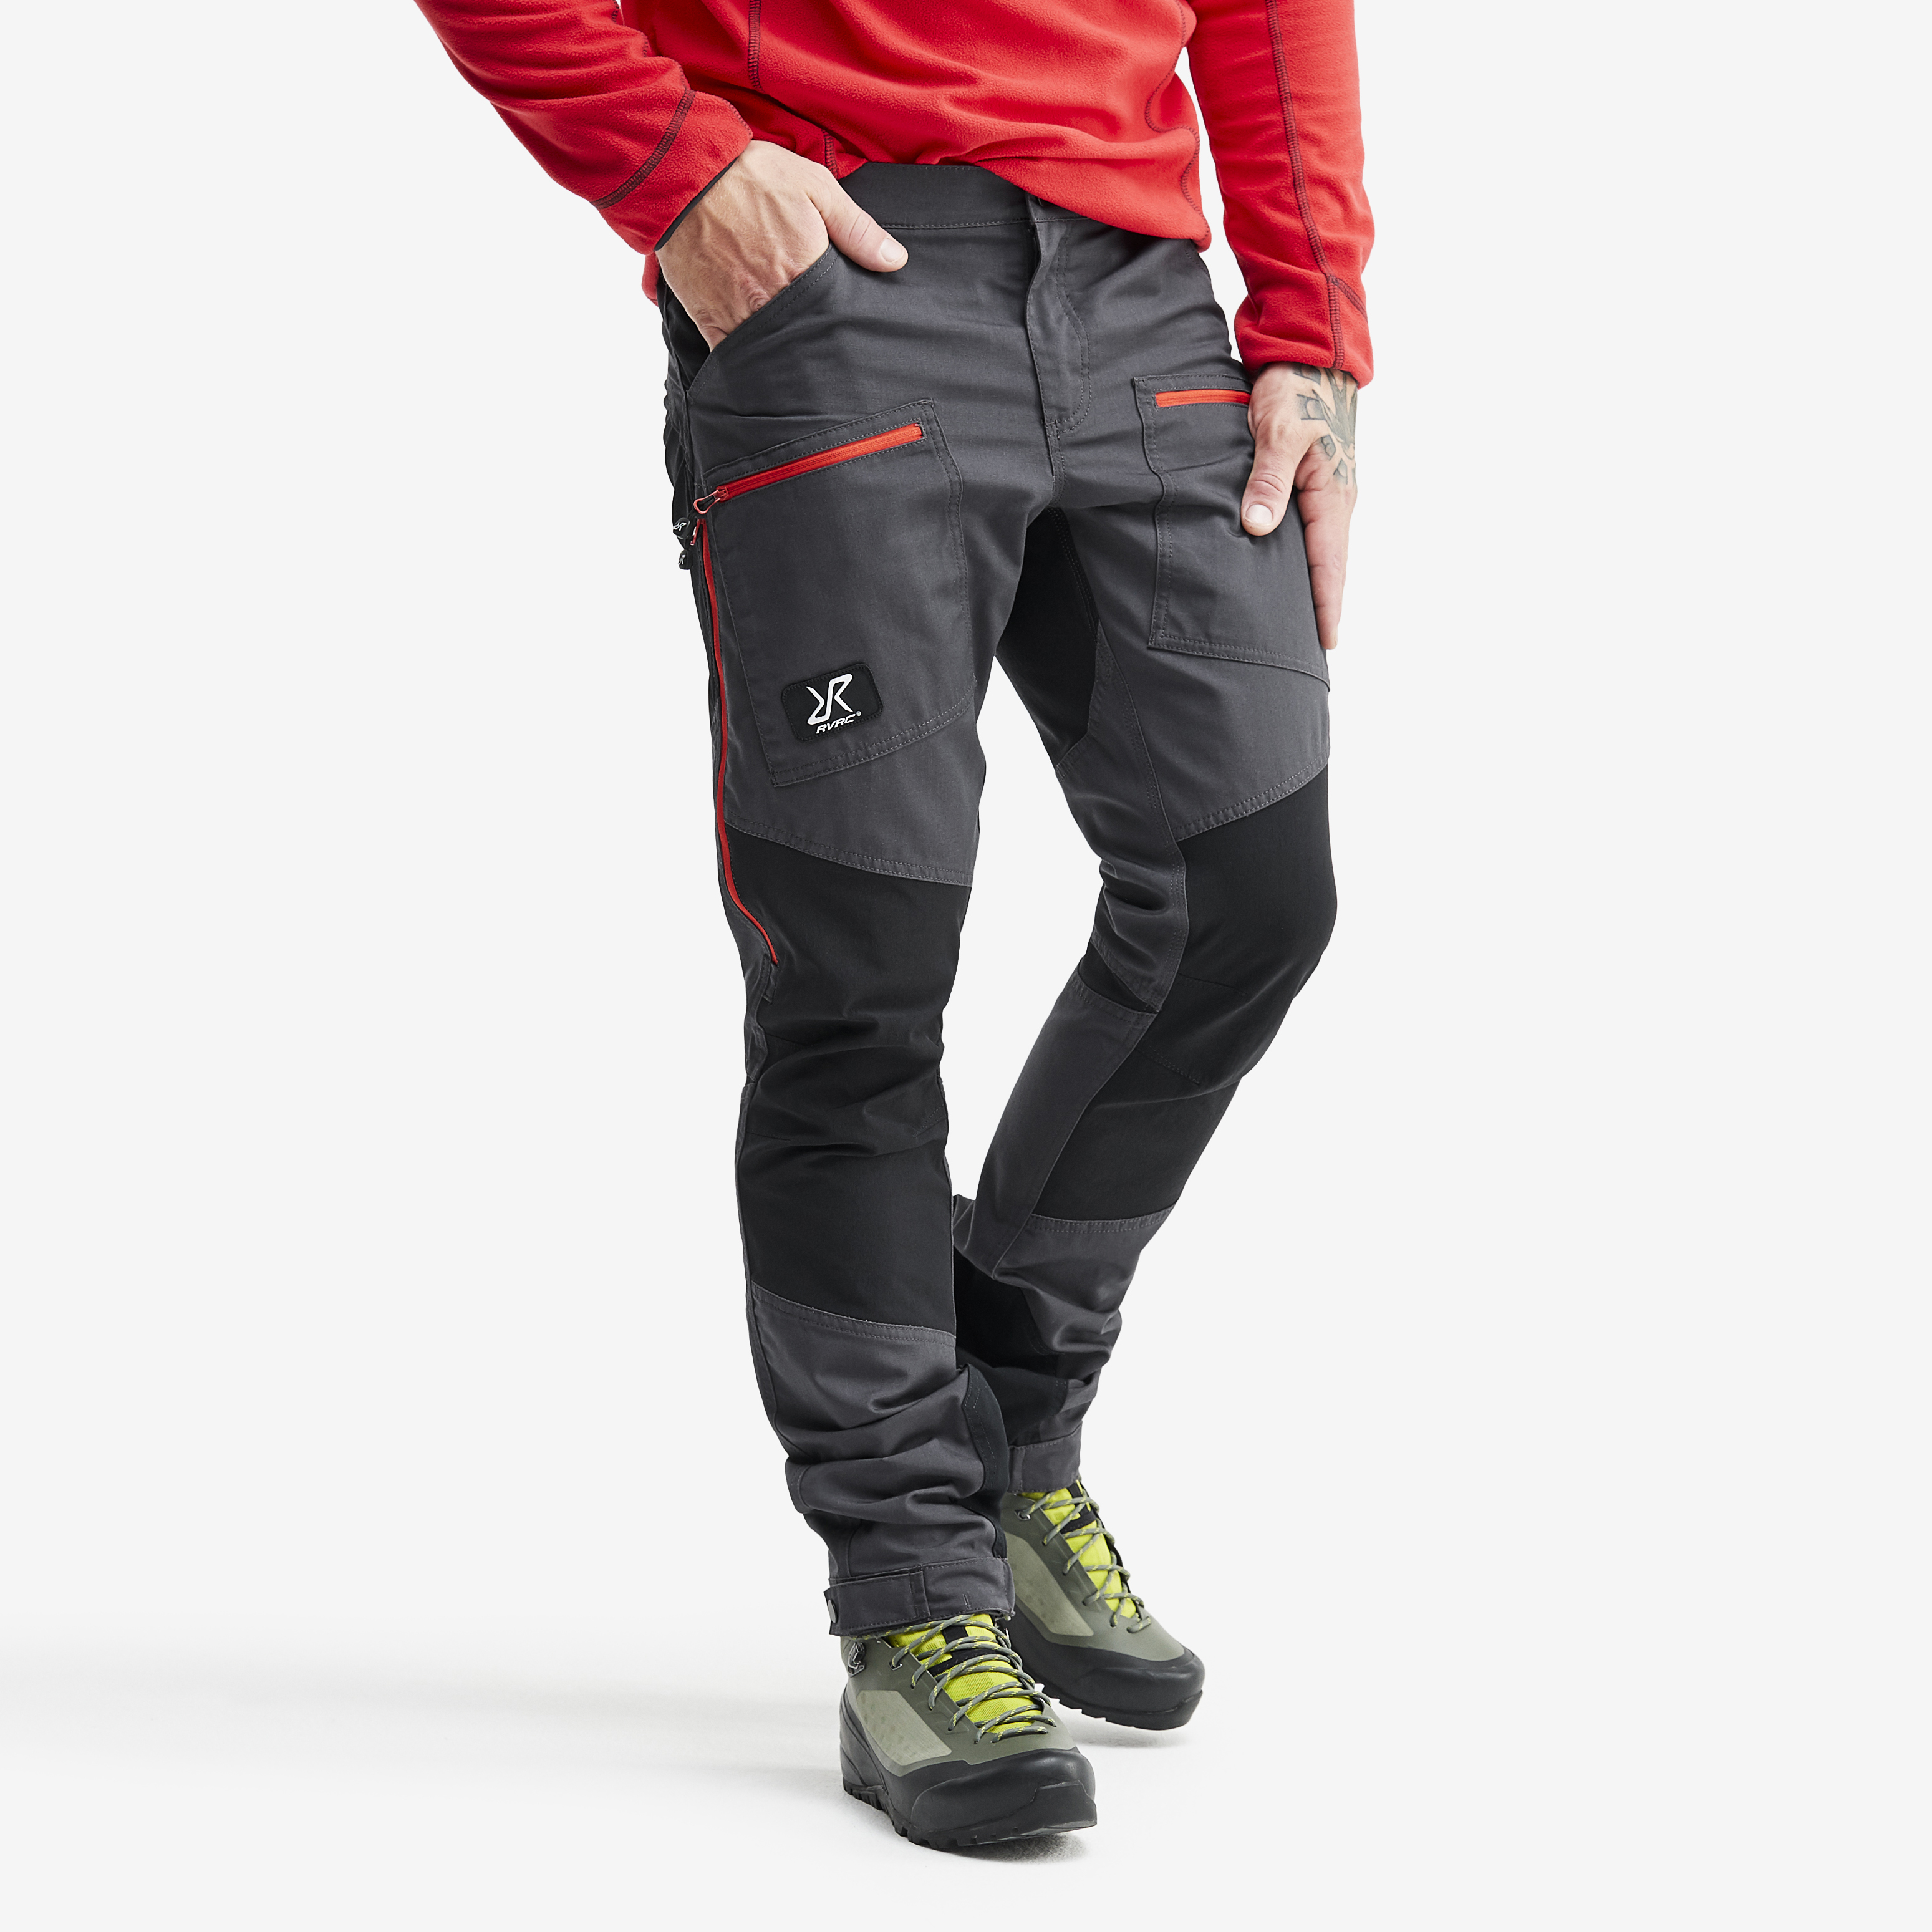 Nordwand Pro Pants Gunmetal/Red Hombres